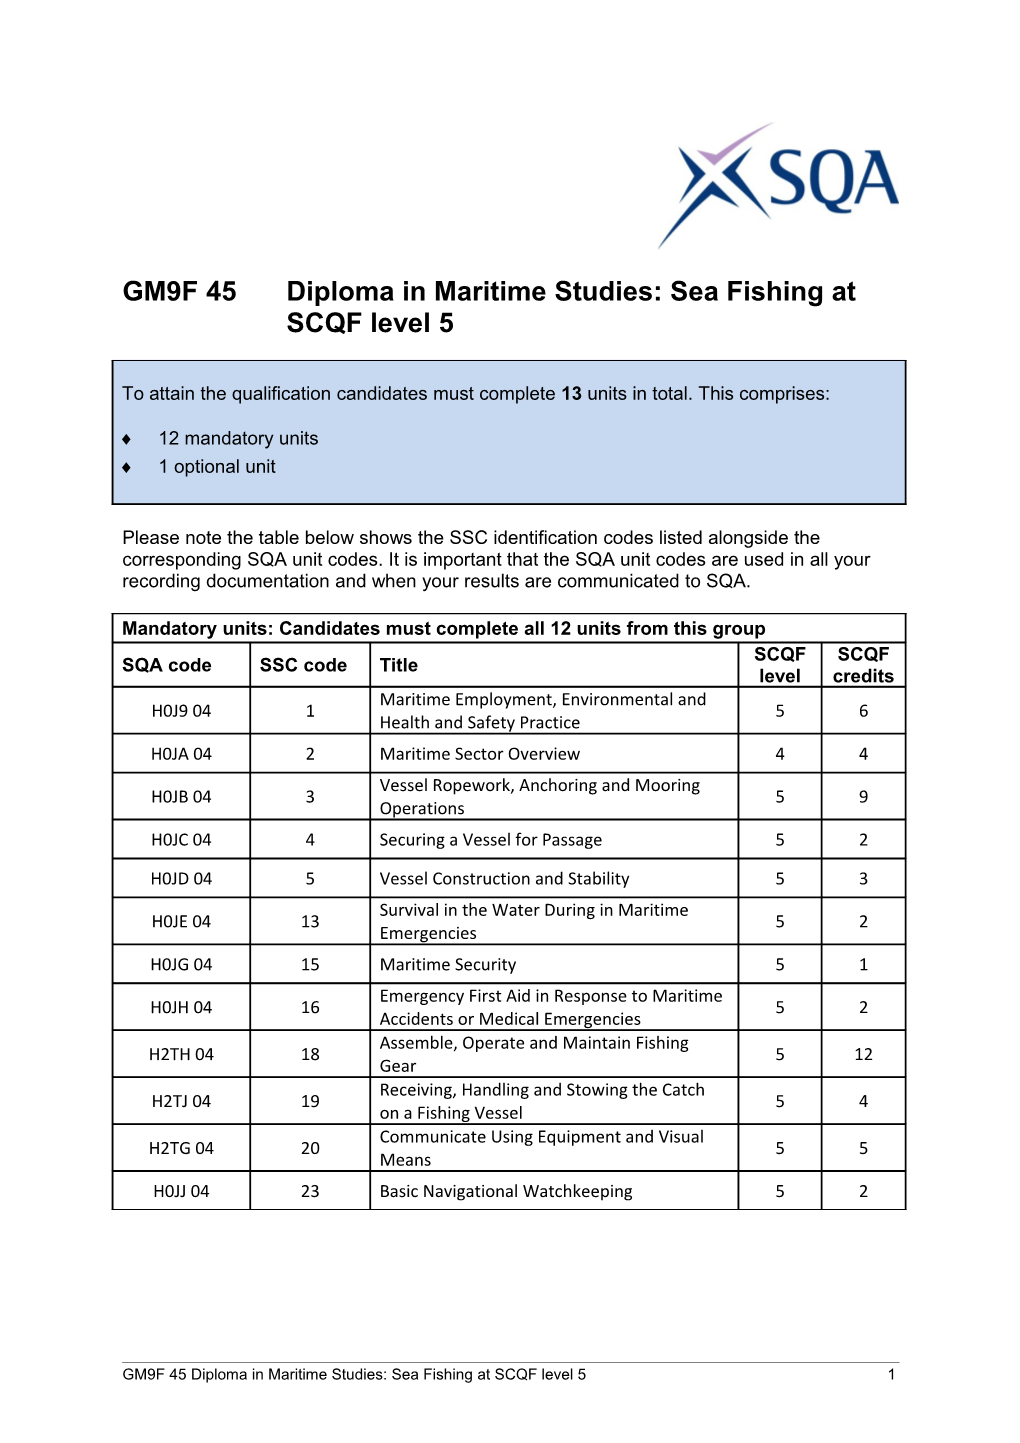 GM9F 45 Diploma in Maritime Studies: Sea Fishing at SCQF Level 51